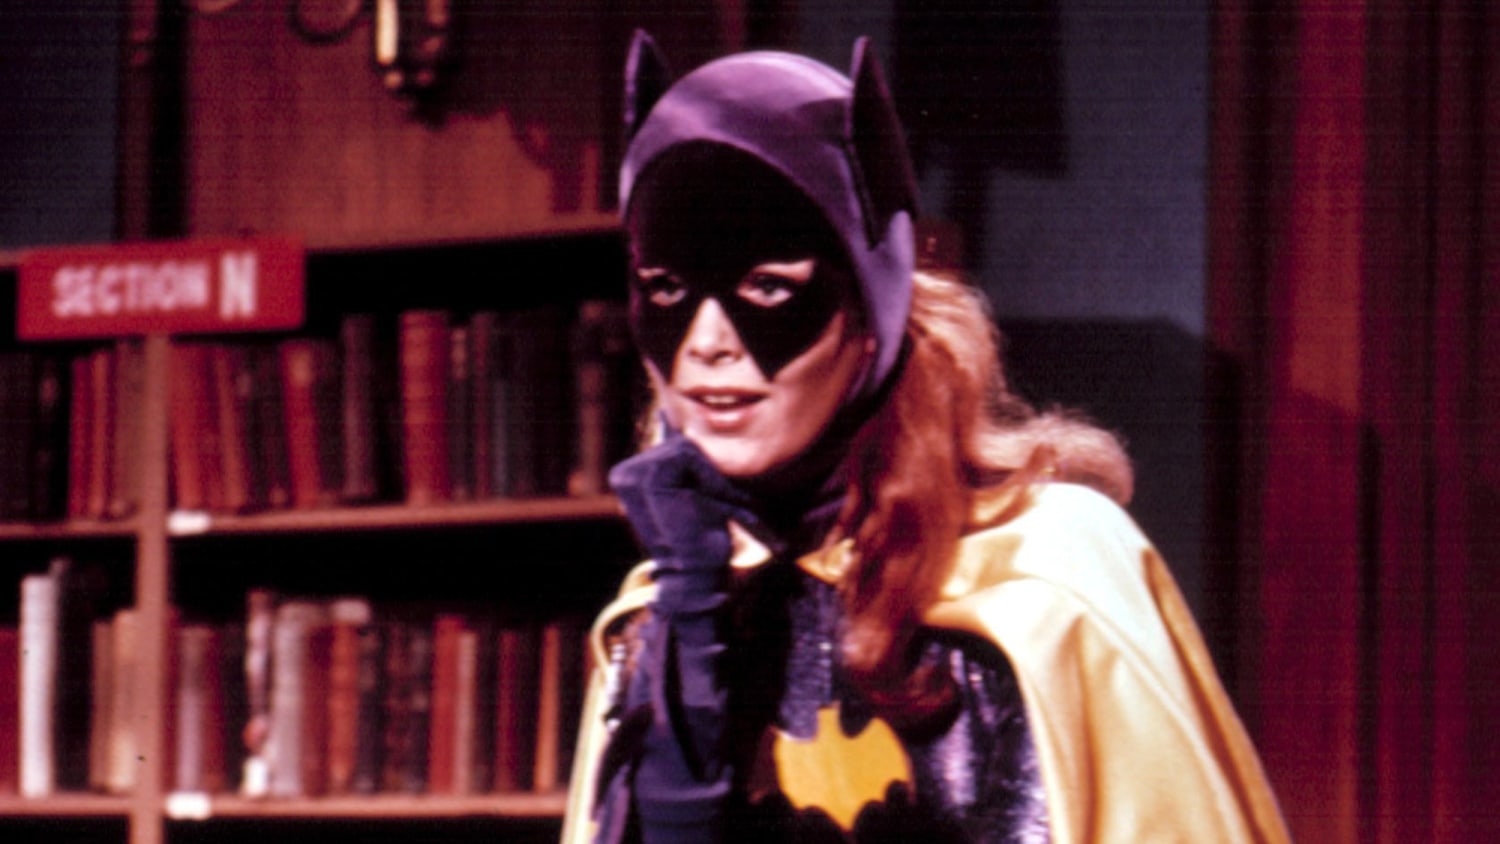 Yvonne Craig, Batgirl in 1960s, dies at 78 in Pacific Palisades – Daily News